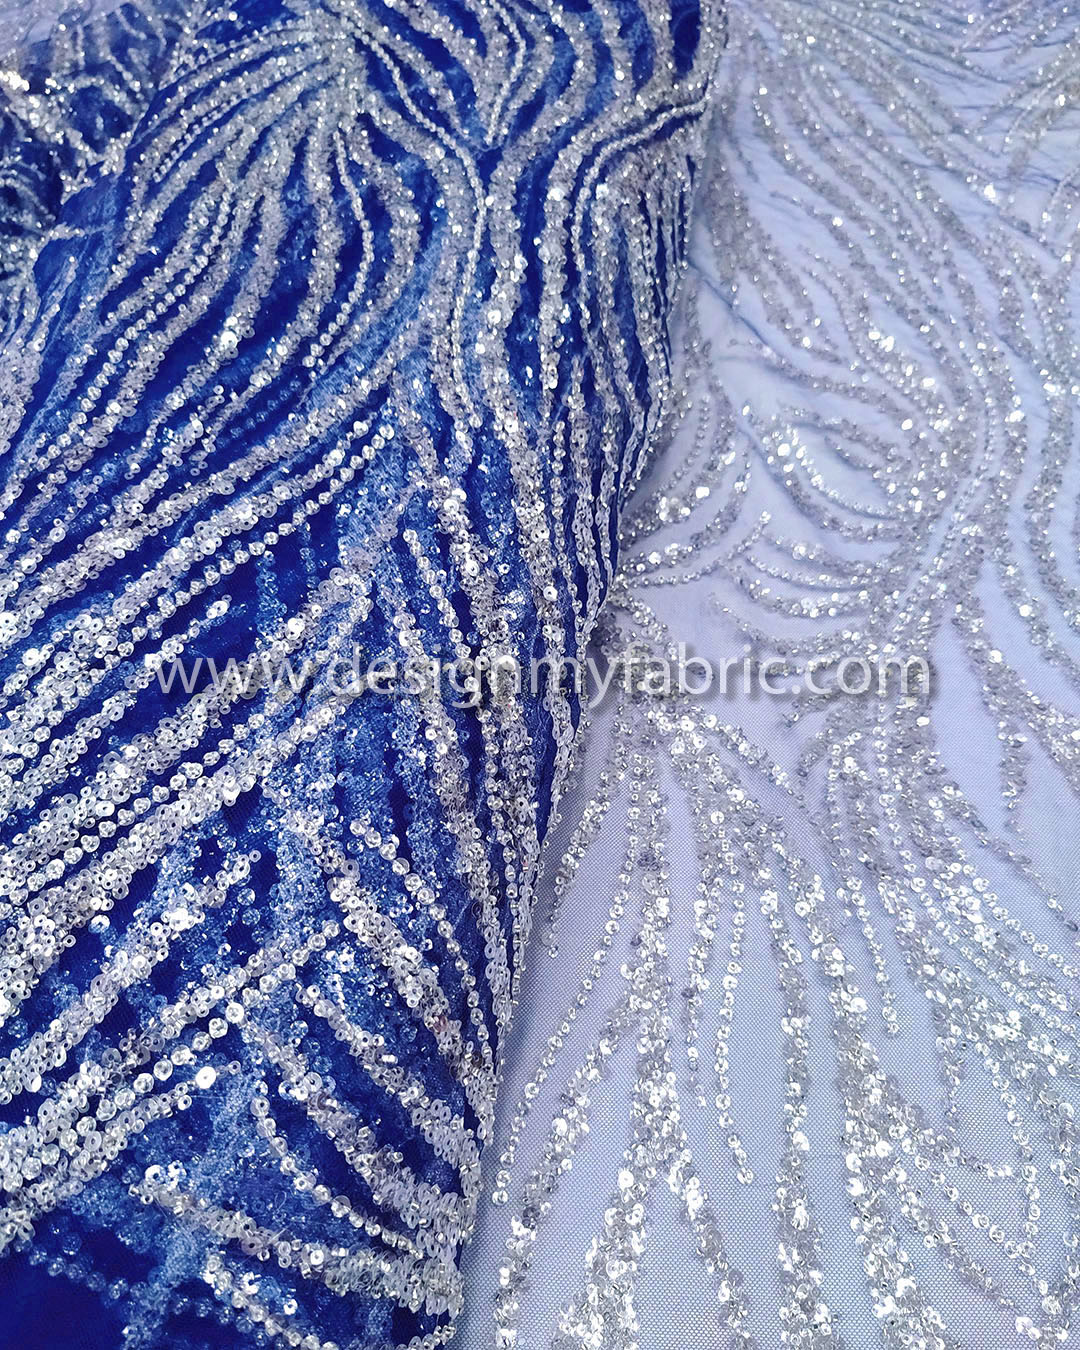 Light blue sequined lace fabric #20583 - Design My Fabric